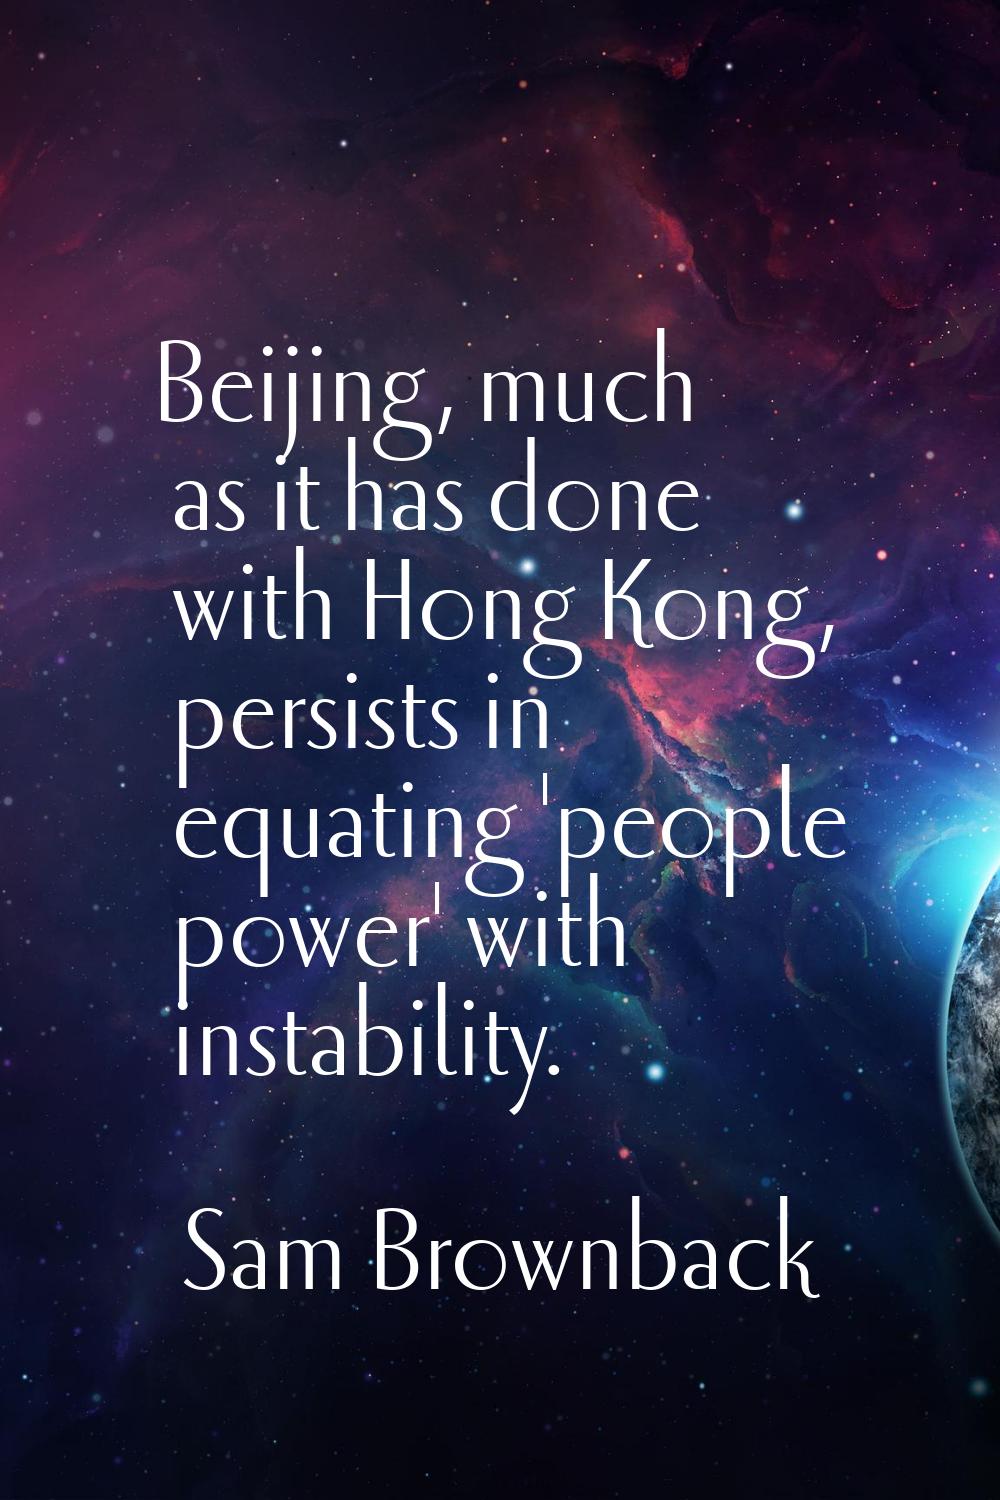 Beijing, much as it has done with Hong Kong, persists in equating 'people power' with instability.